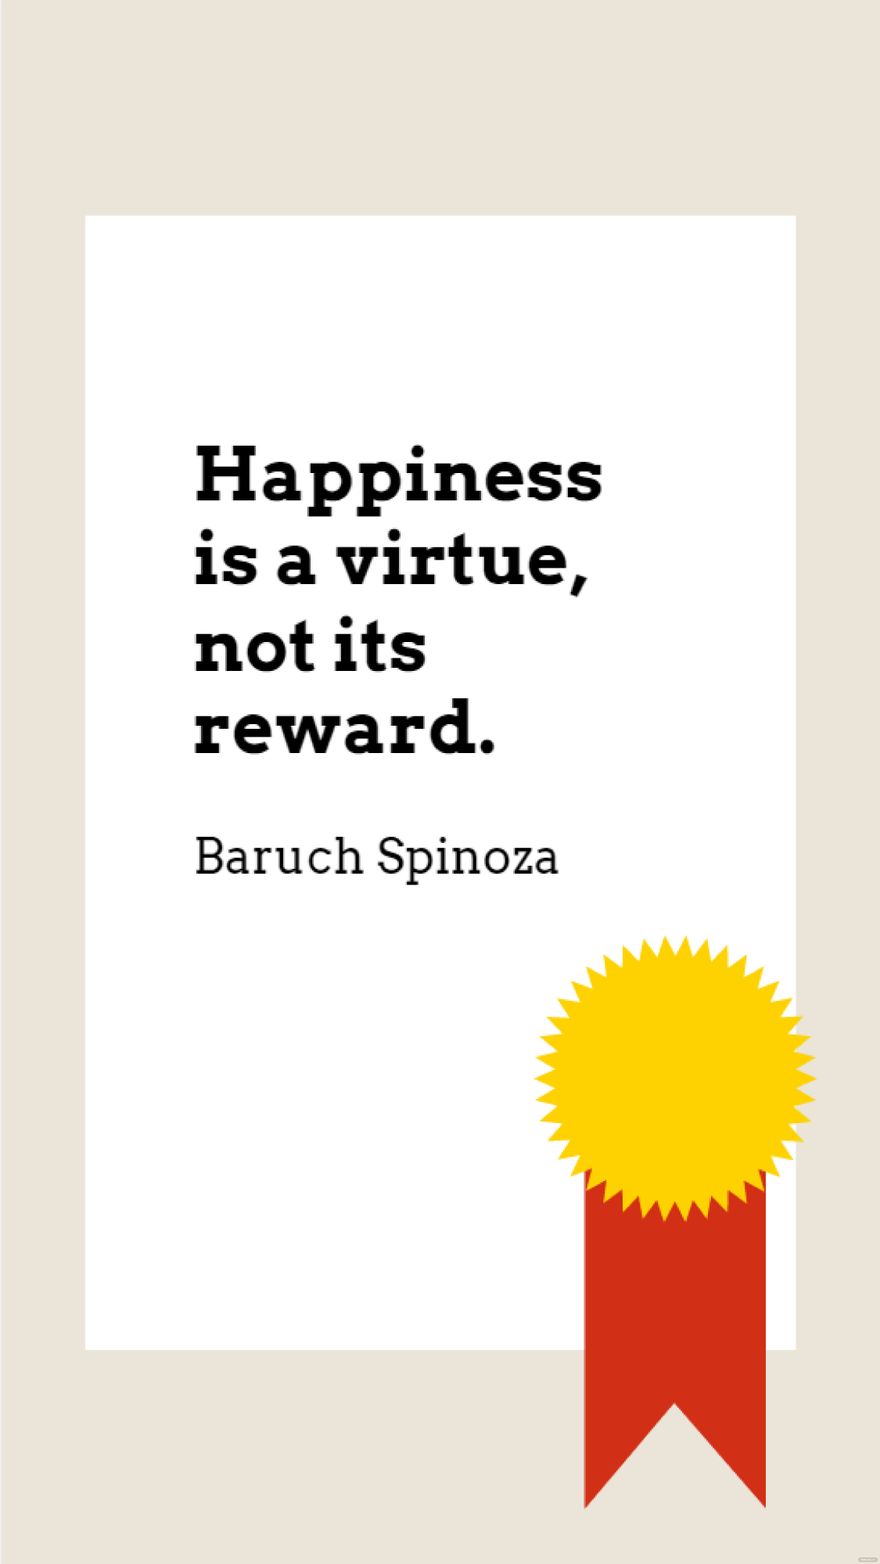 Baruch Spinoza - Happiness is a virtue, not its reward. in JPG